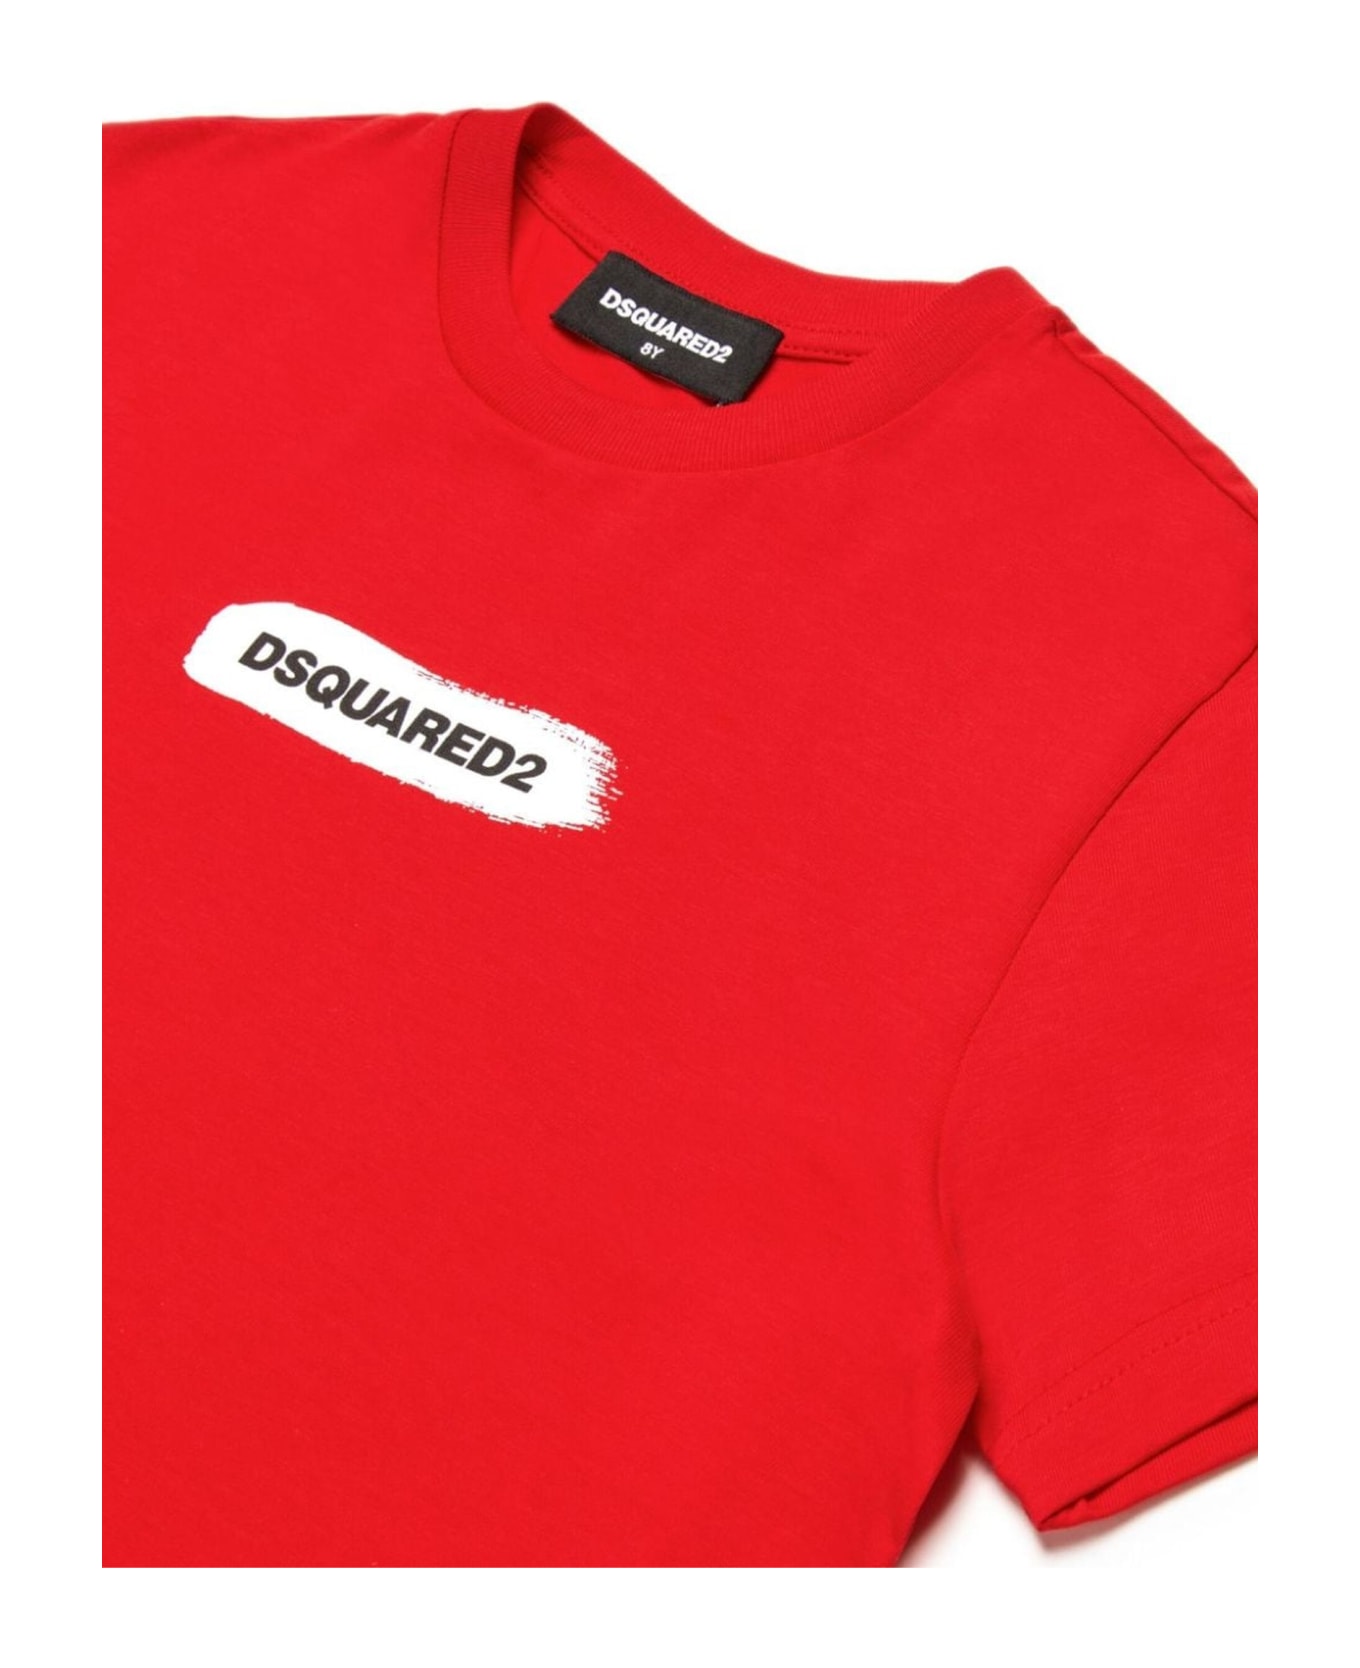 Dsquared2 Red Cotton T-shirt - Rosso